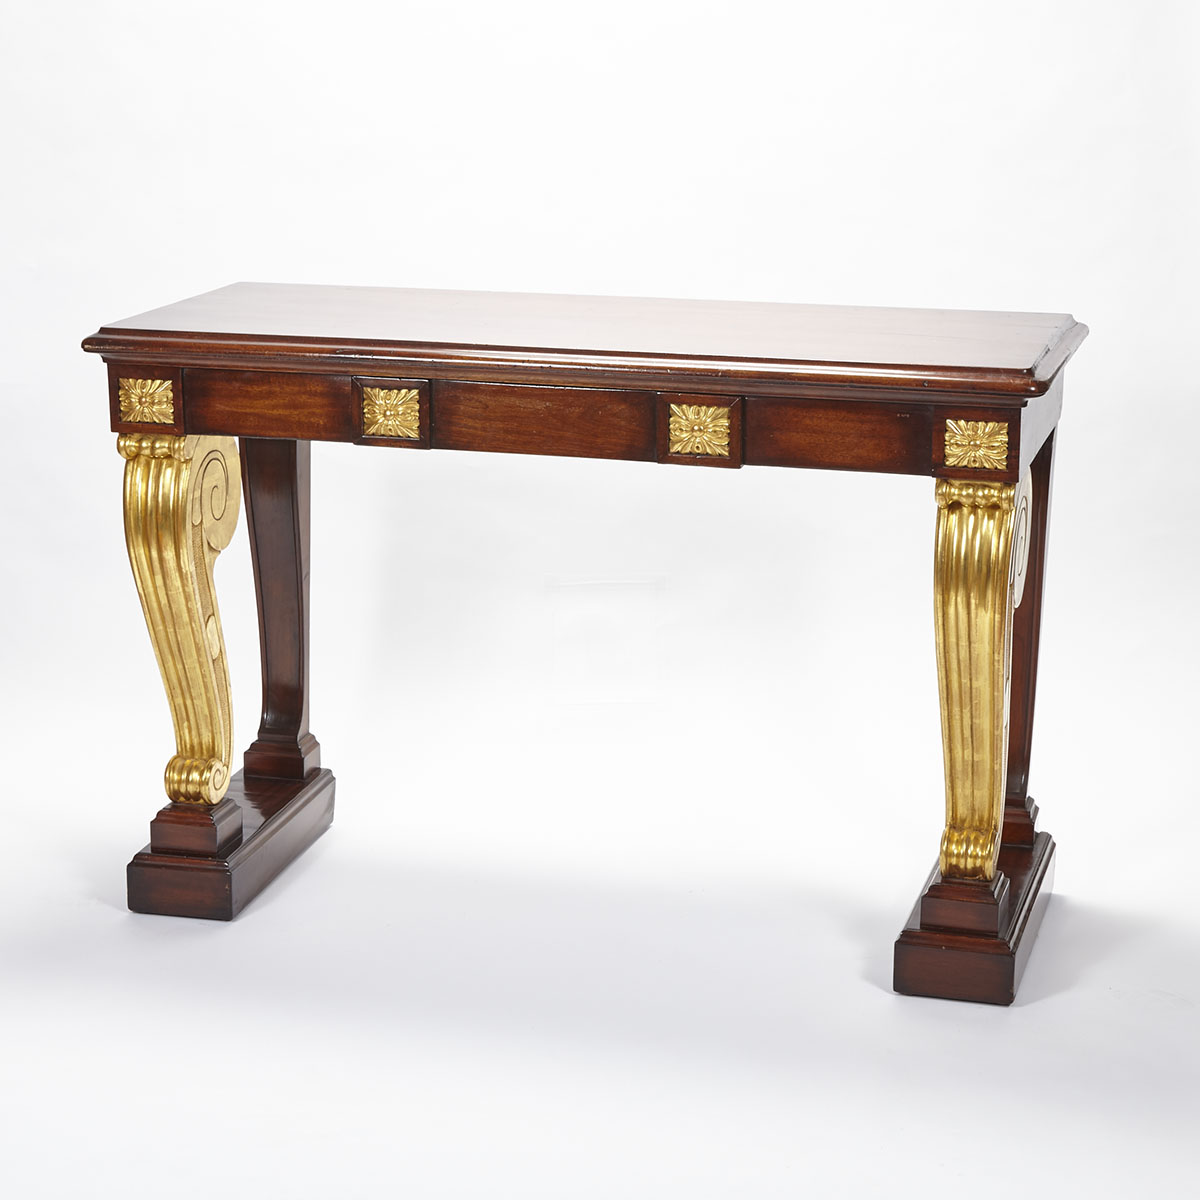 William IV Mahogany Parcel Gilt Console Table, early 19th century